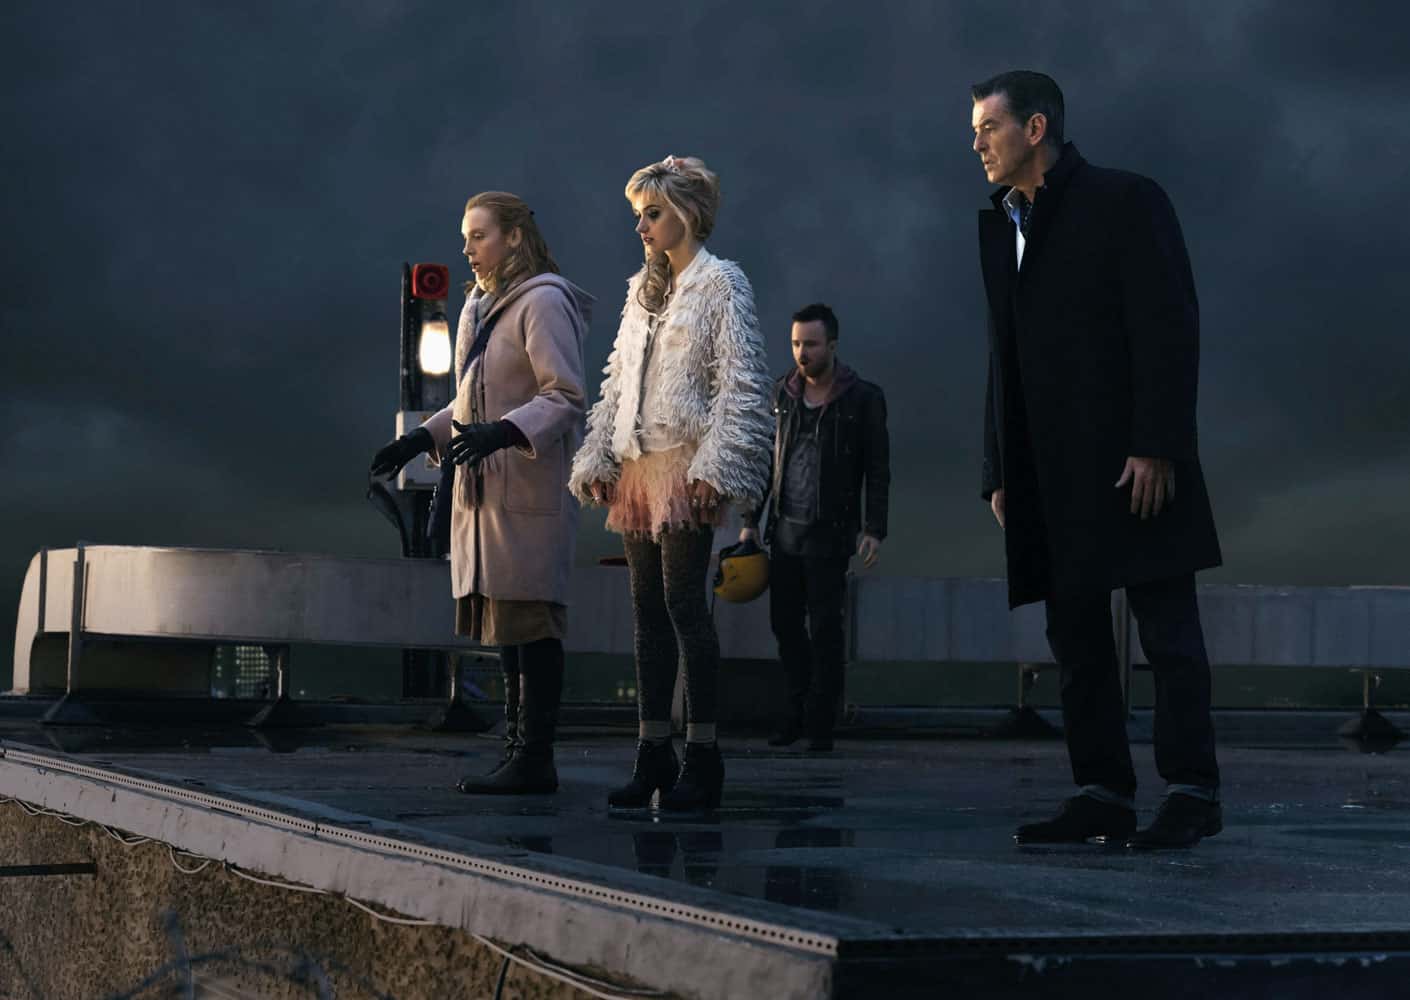 The group on the rooftop in the film, A Long Way Down (Credits: Lionsgate)